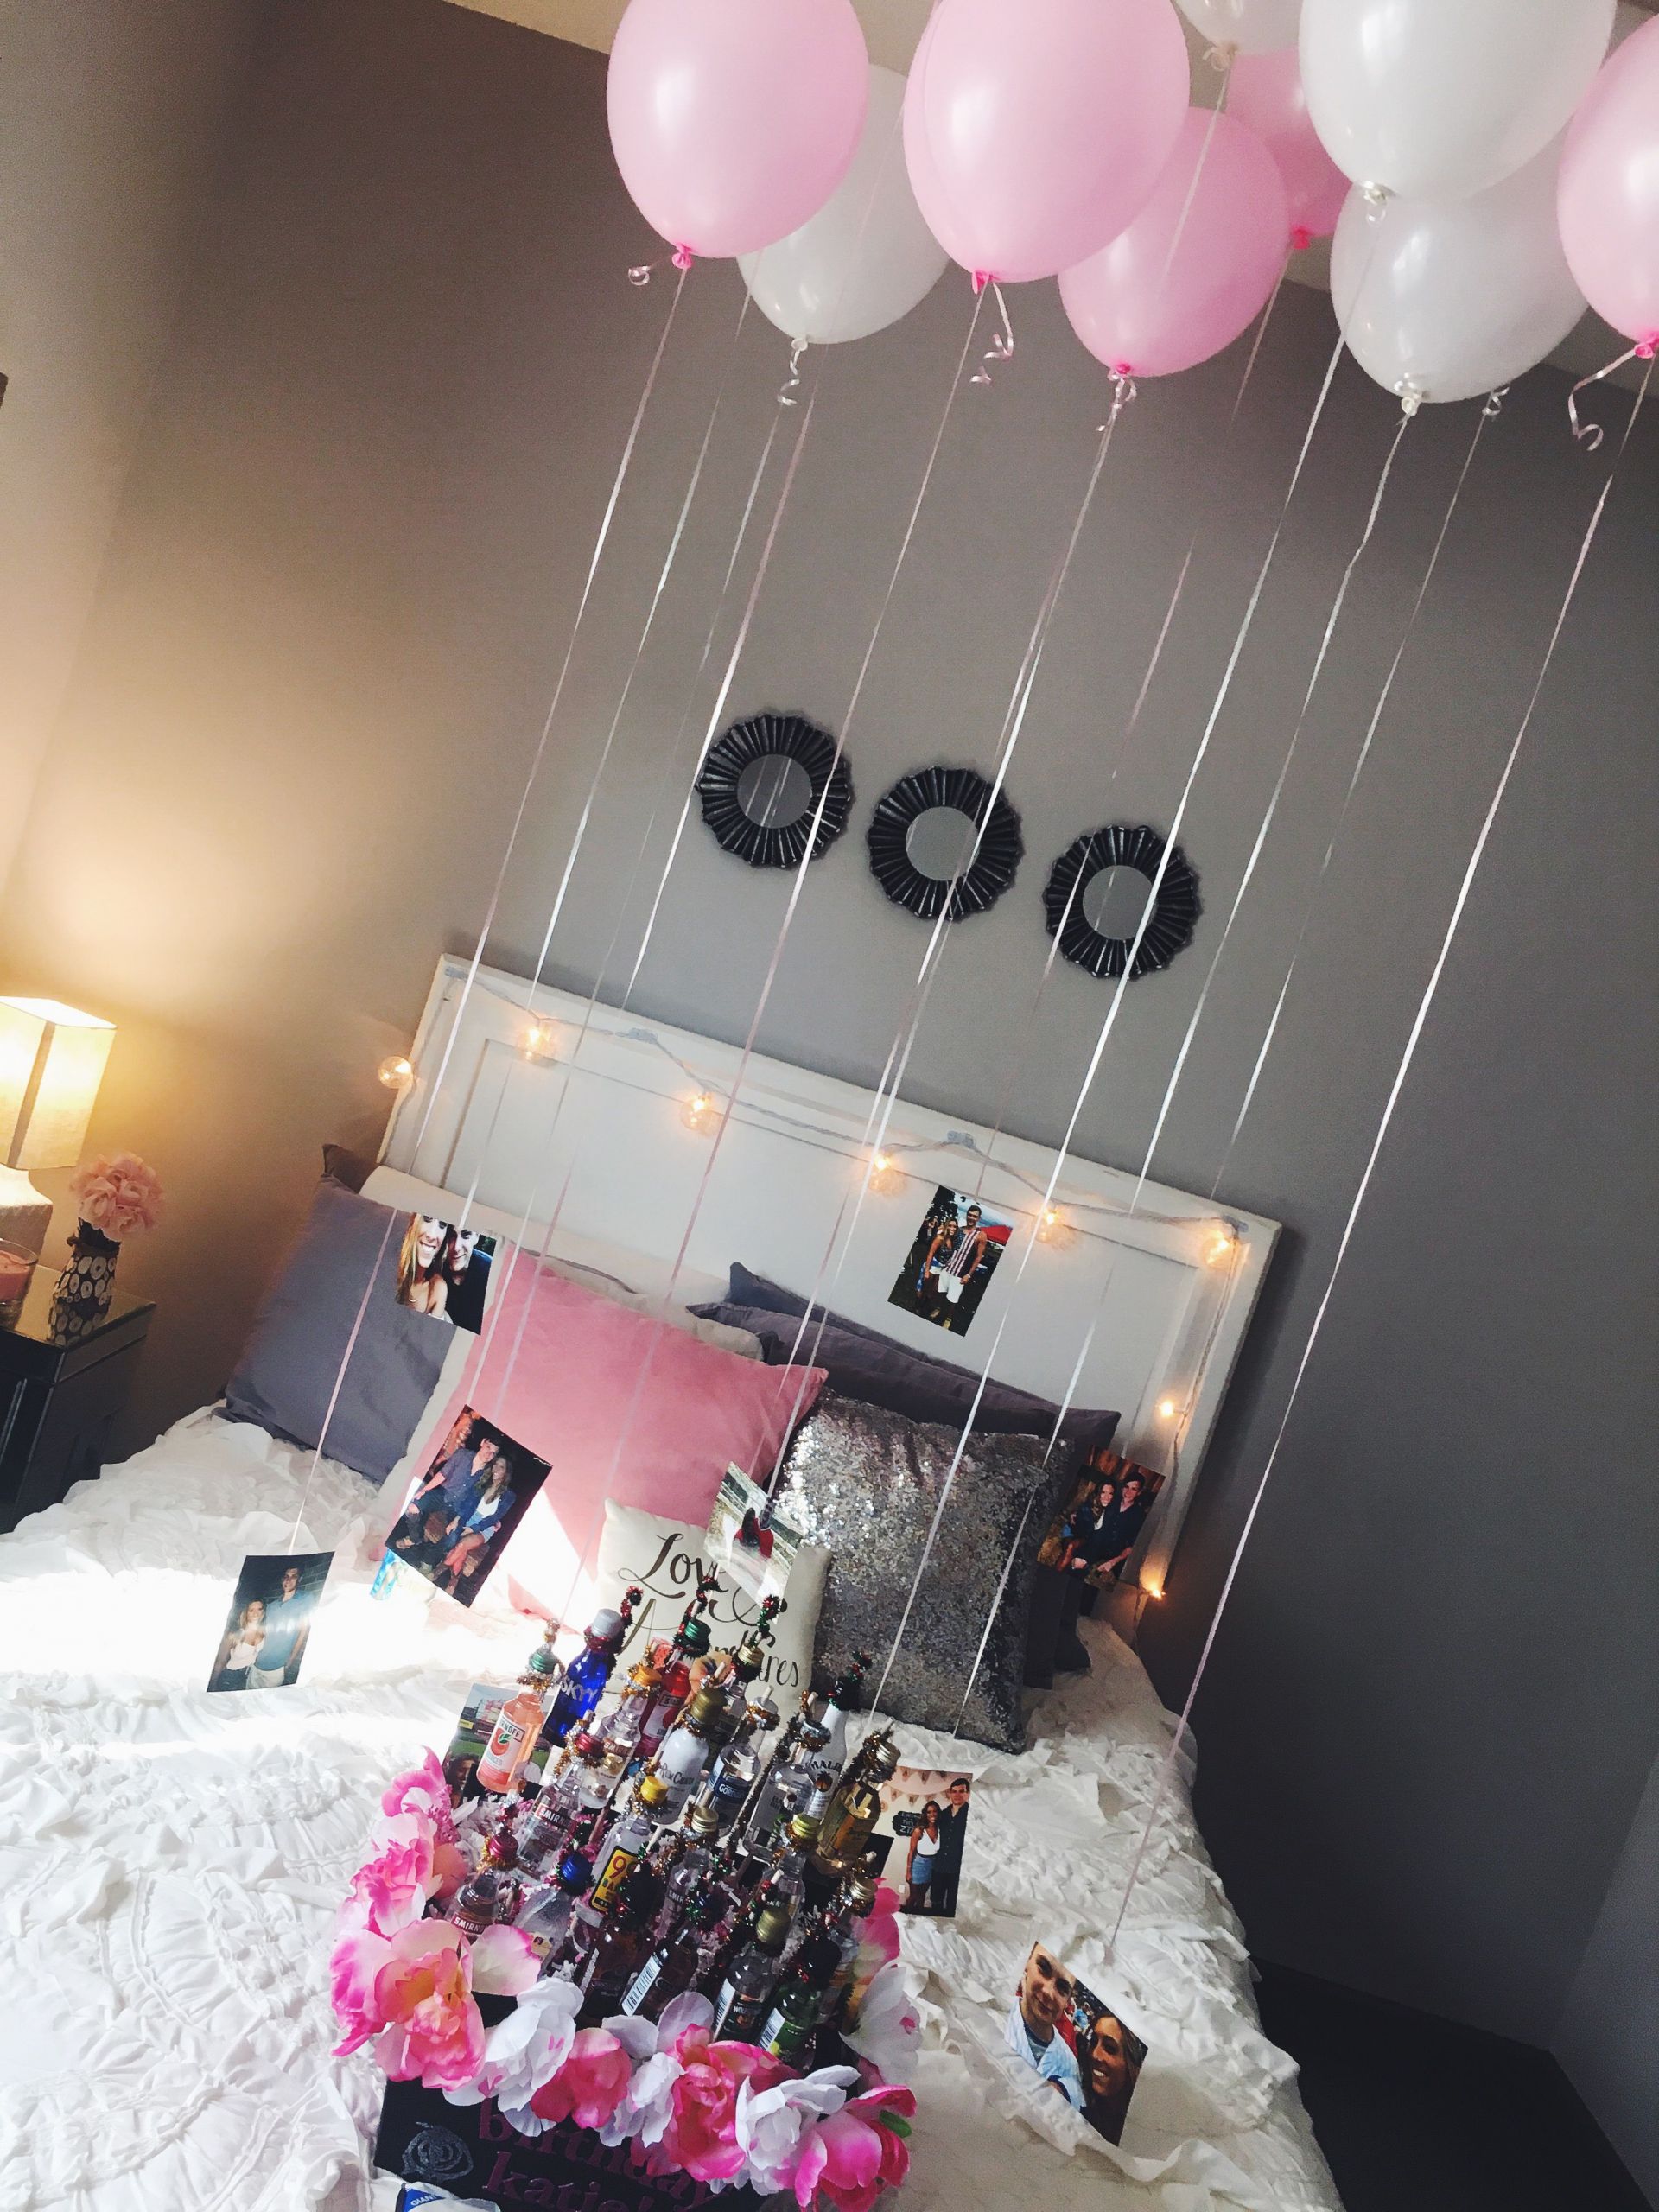 Gf Birthday Gift Ideas
 easy and cute decorations for a friend or girlfriends 21st